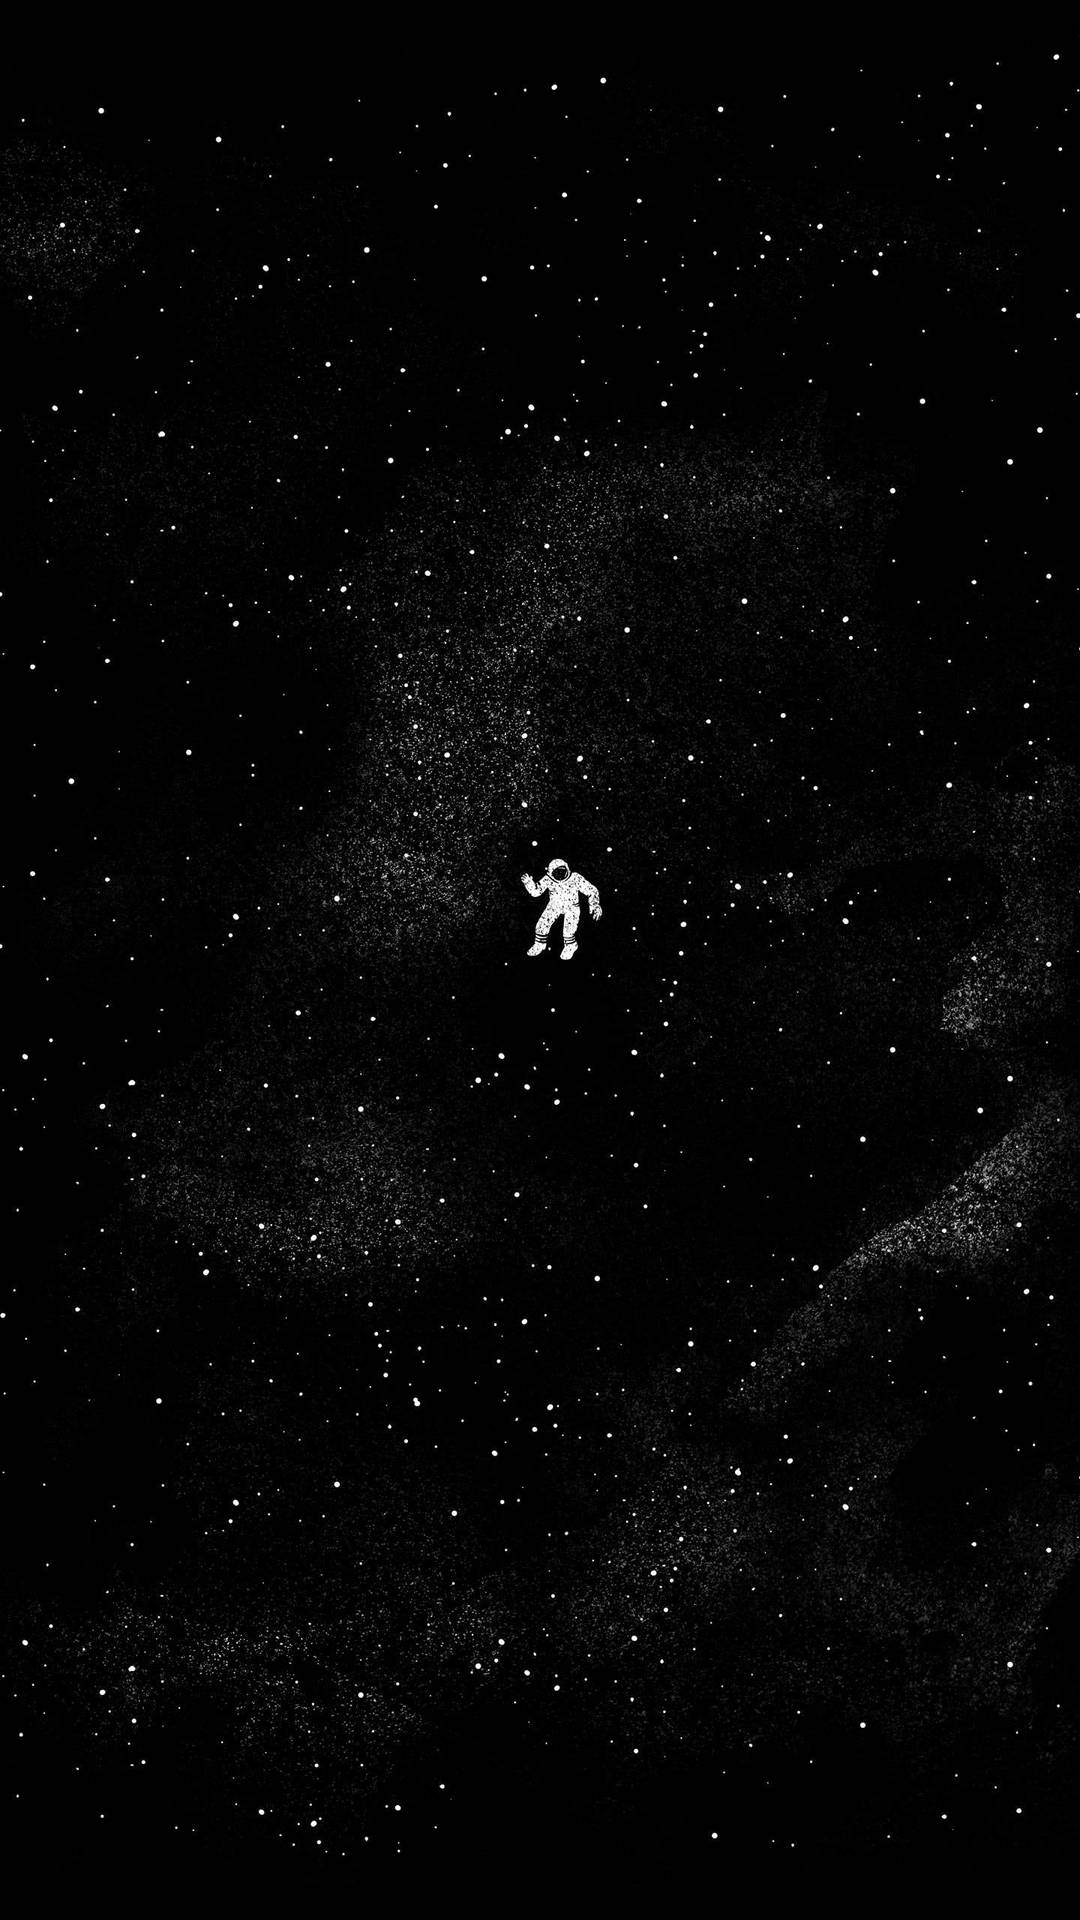 Black And White Astronaut Starry Space Art Wallpaper